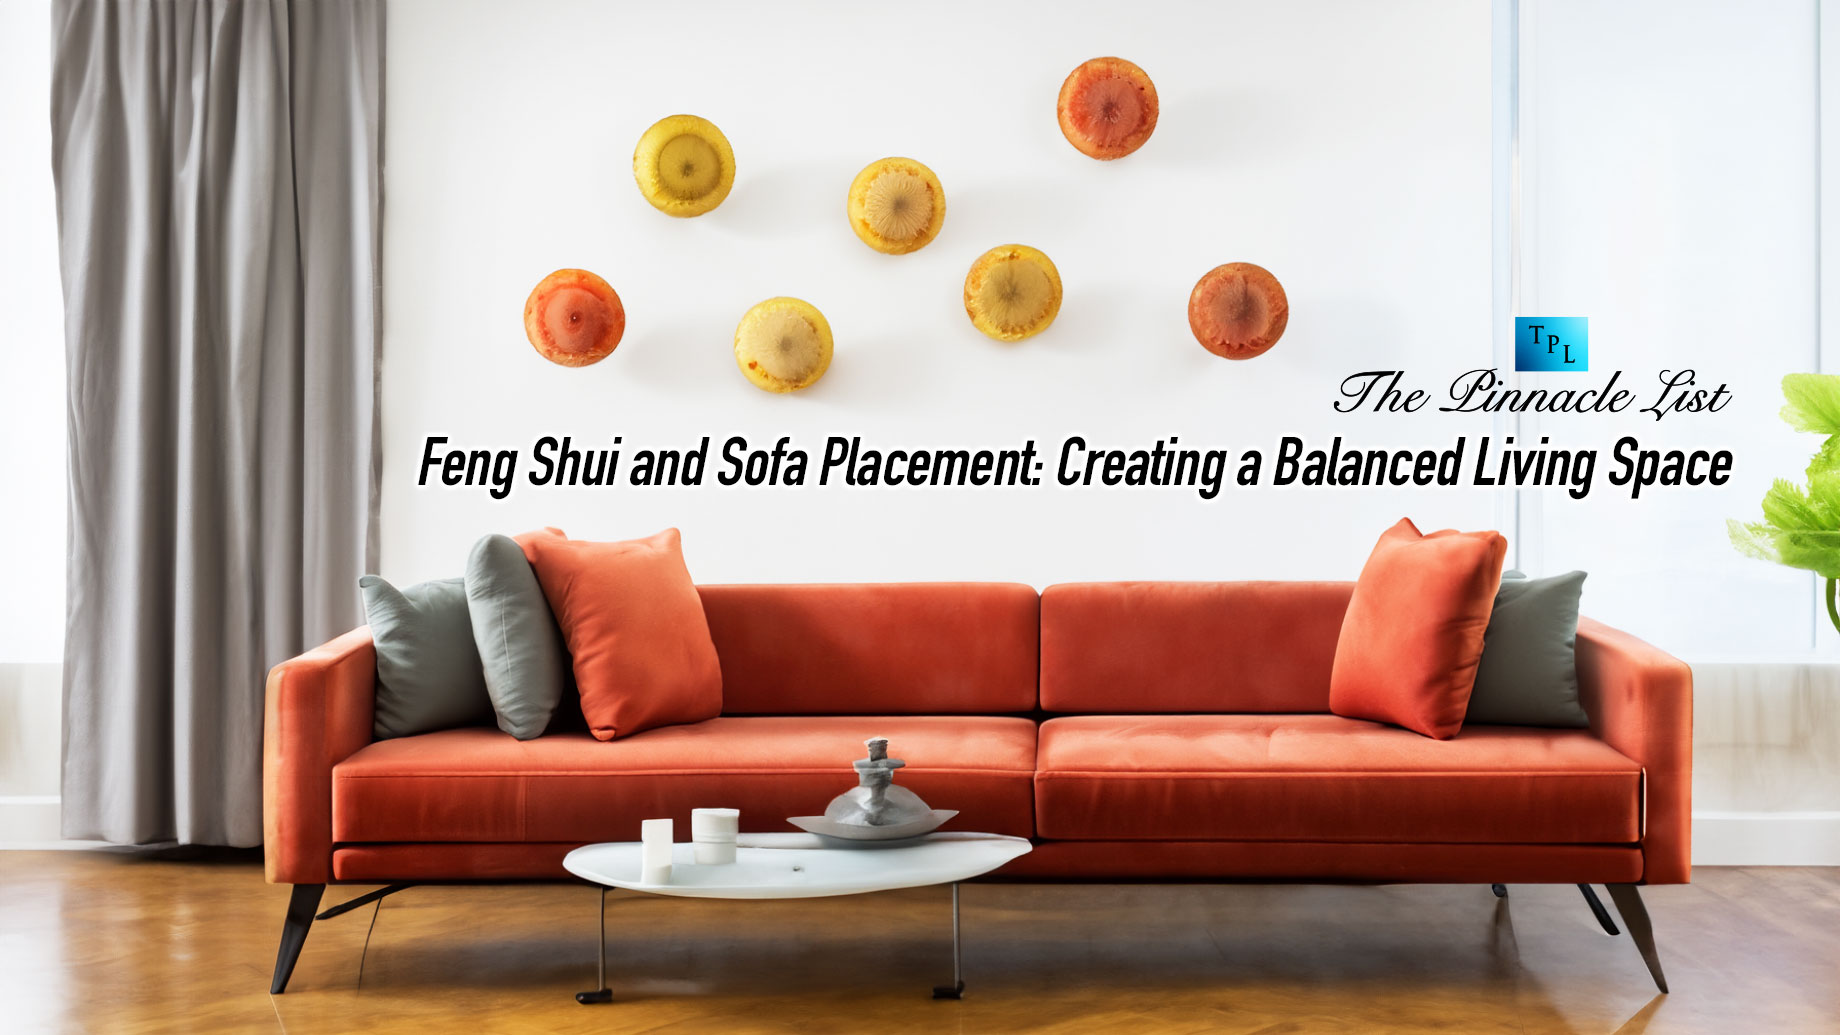 Feng Shui and Sofa Placement: Creating a Balanced Living Space